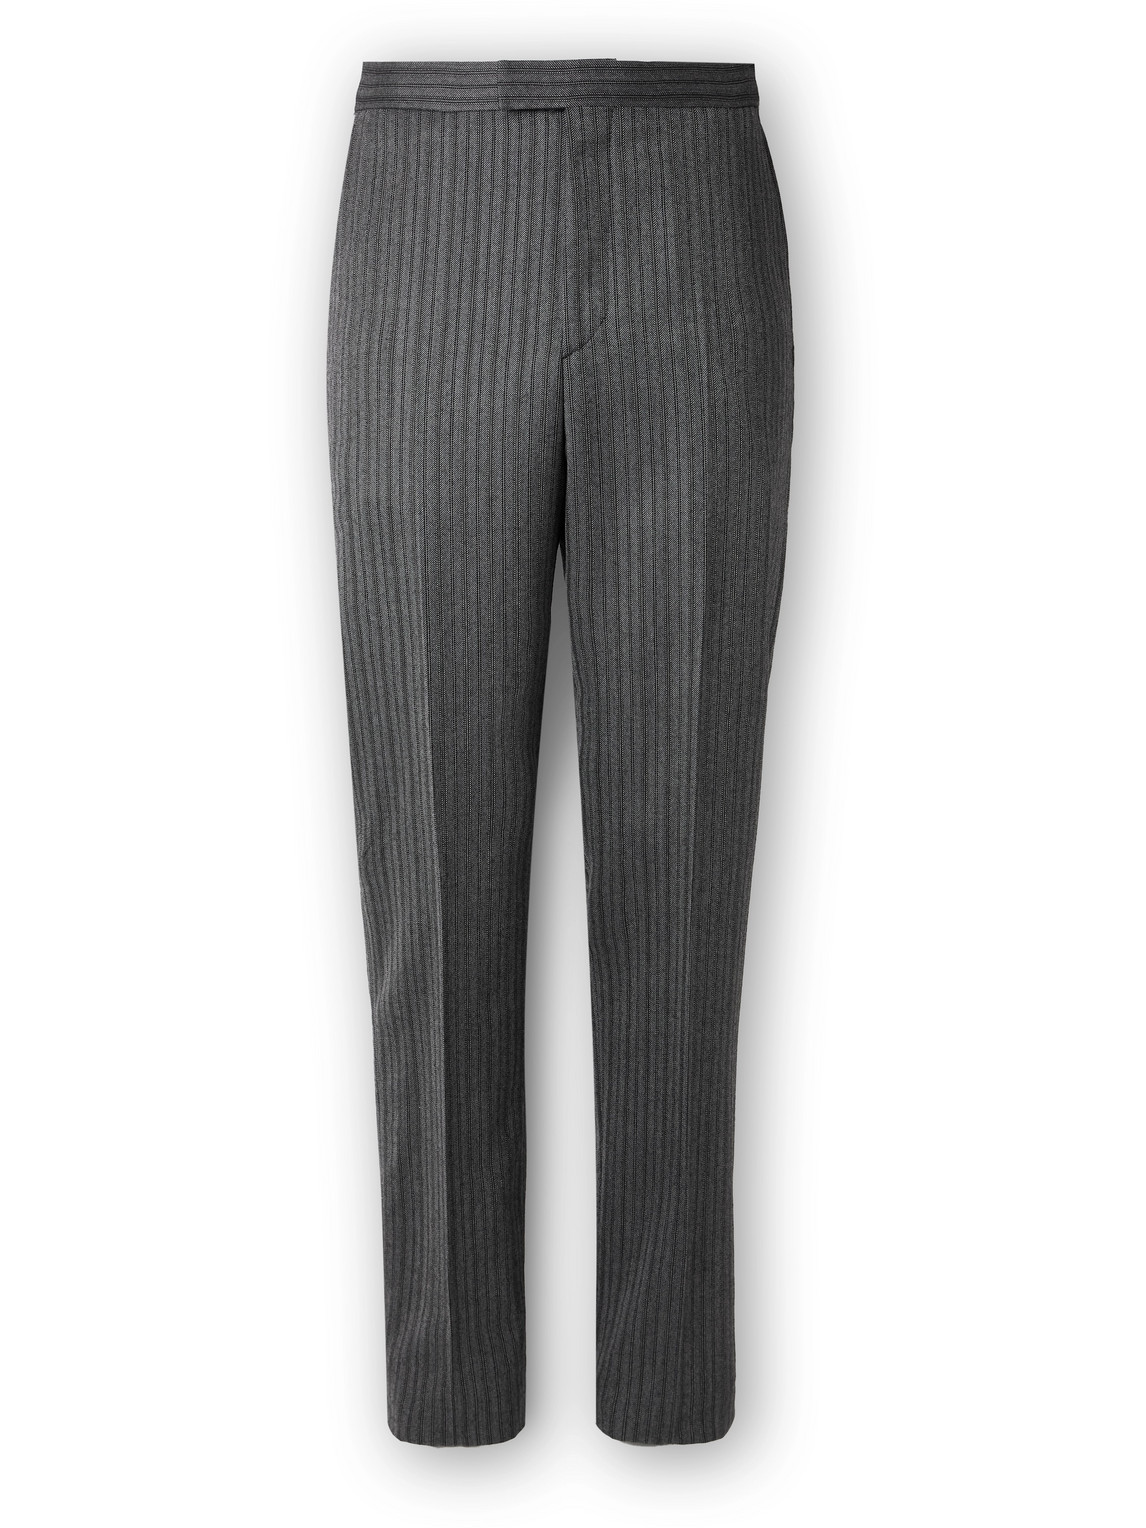 Westminster Slim-Fit Straight-Leg Striped Wool Trousers